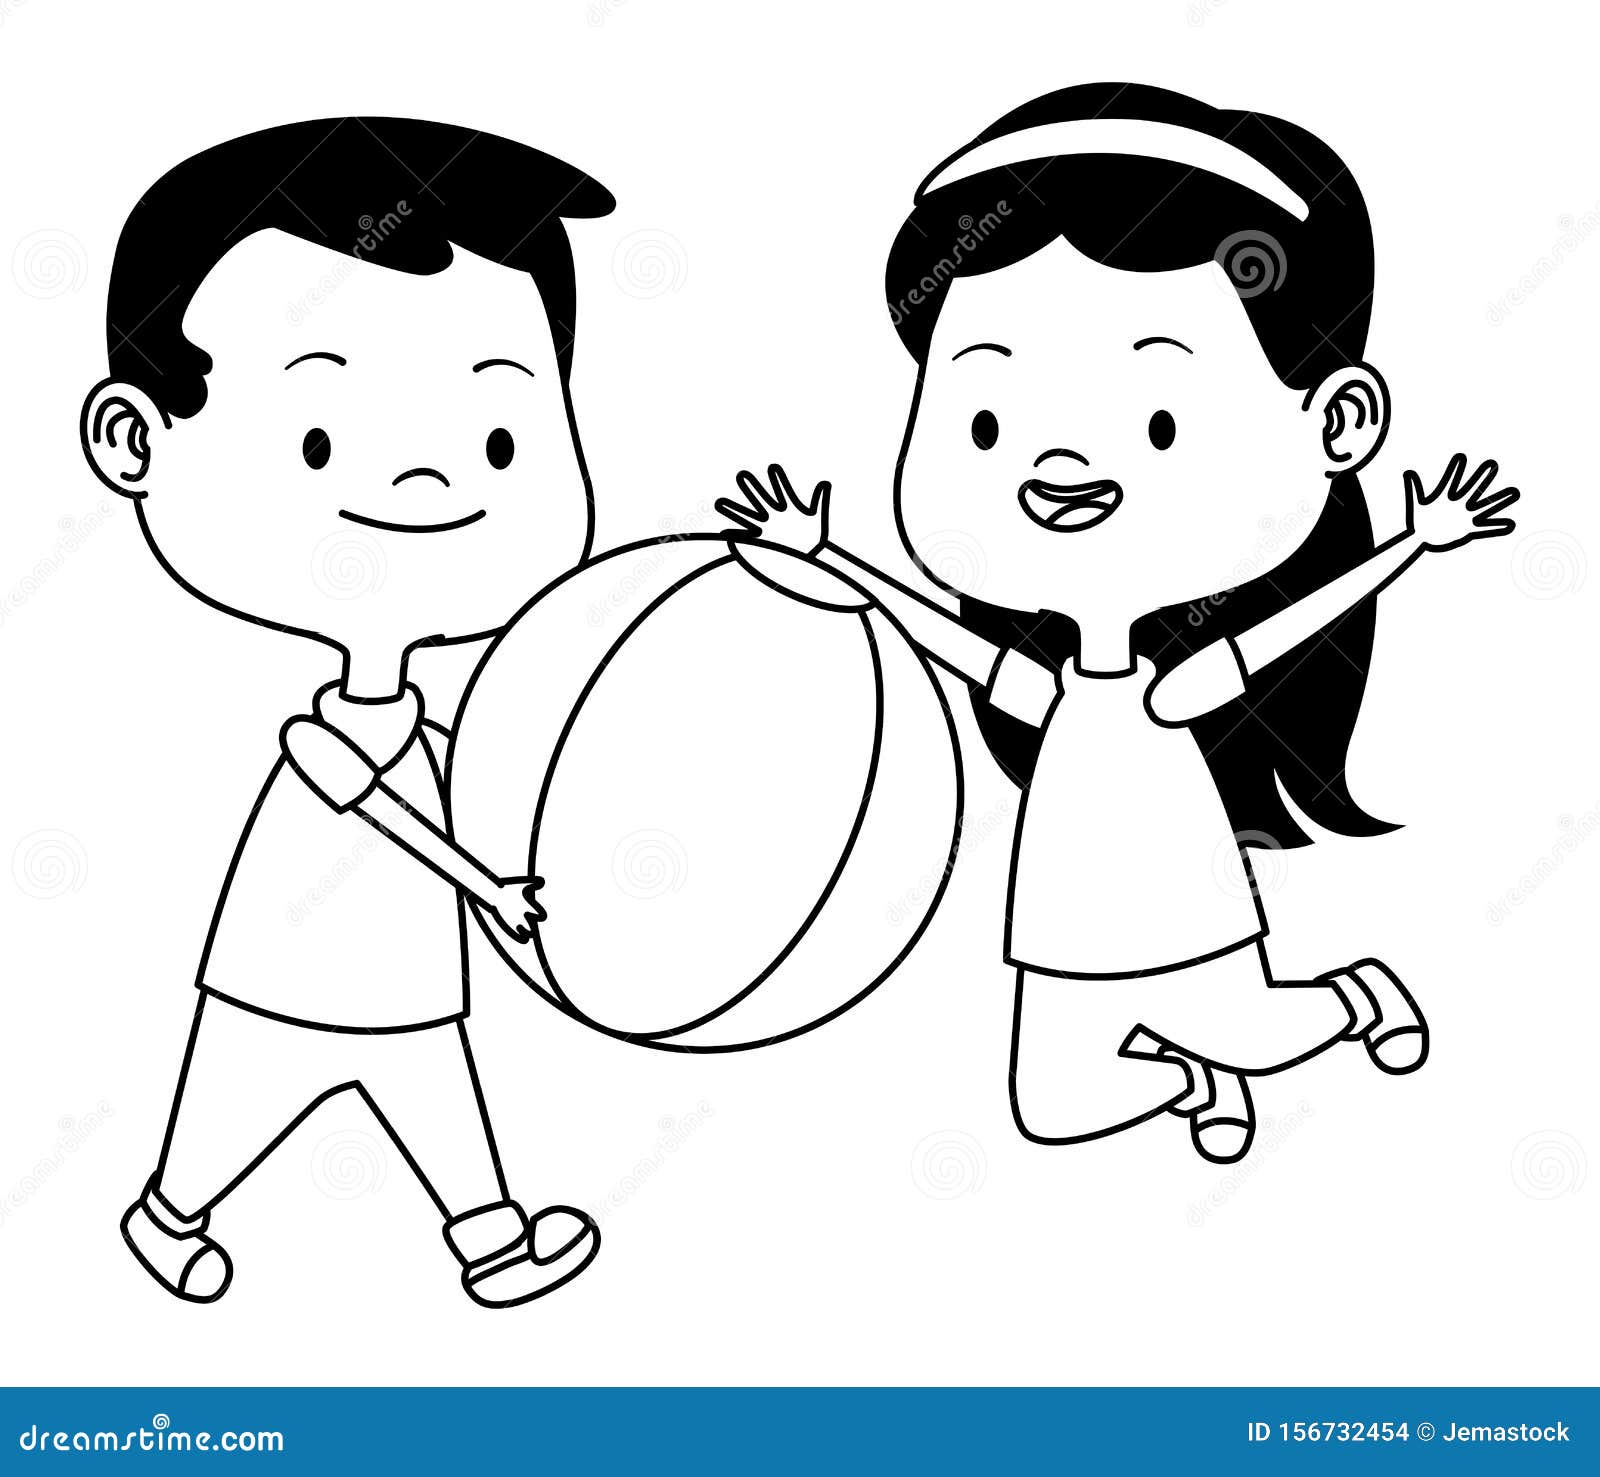 Cute Happy Kids Having Fun Cartoons In Black And White Stock Vector Illustration Of Cute Smiling